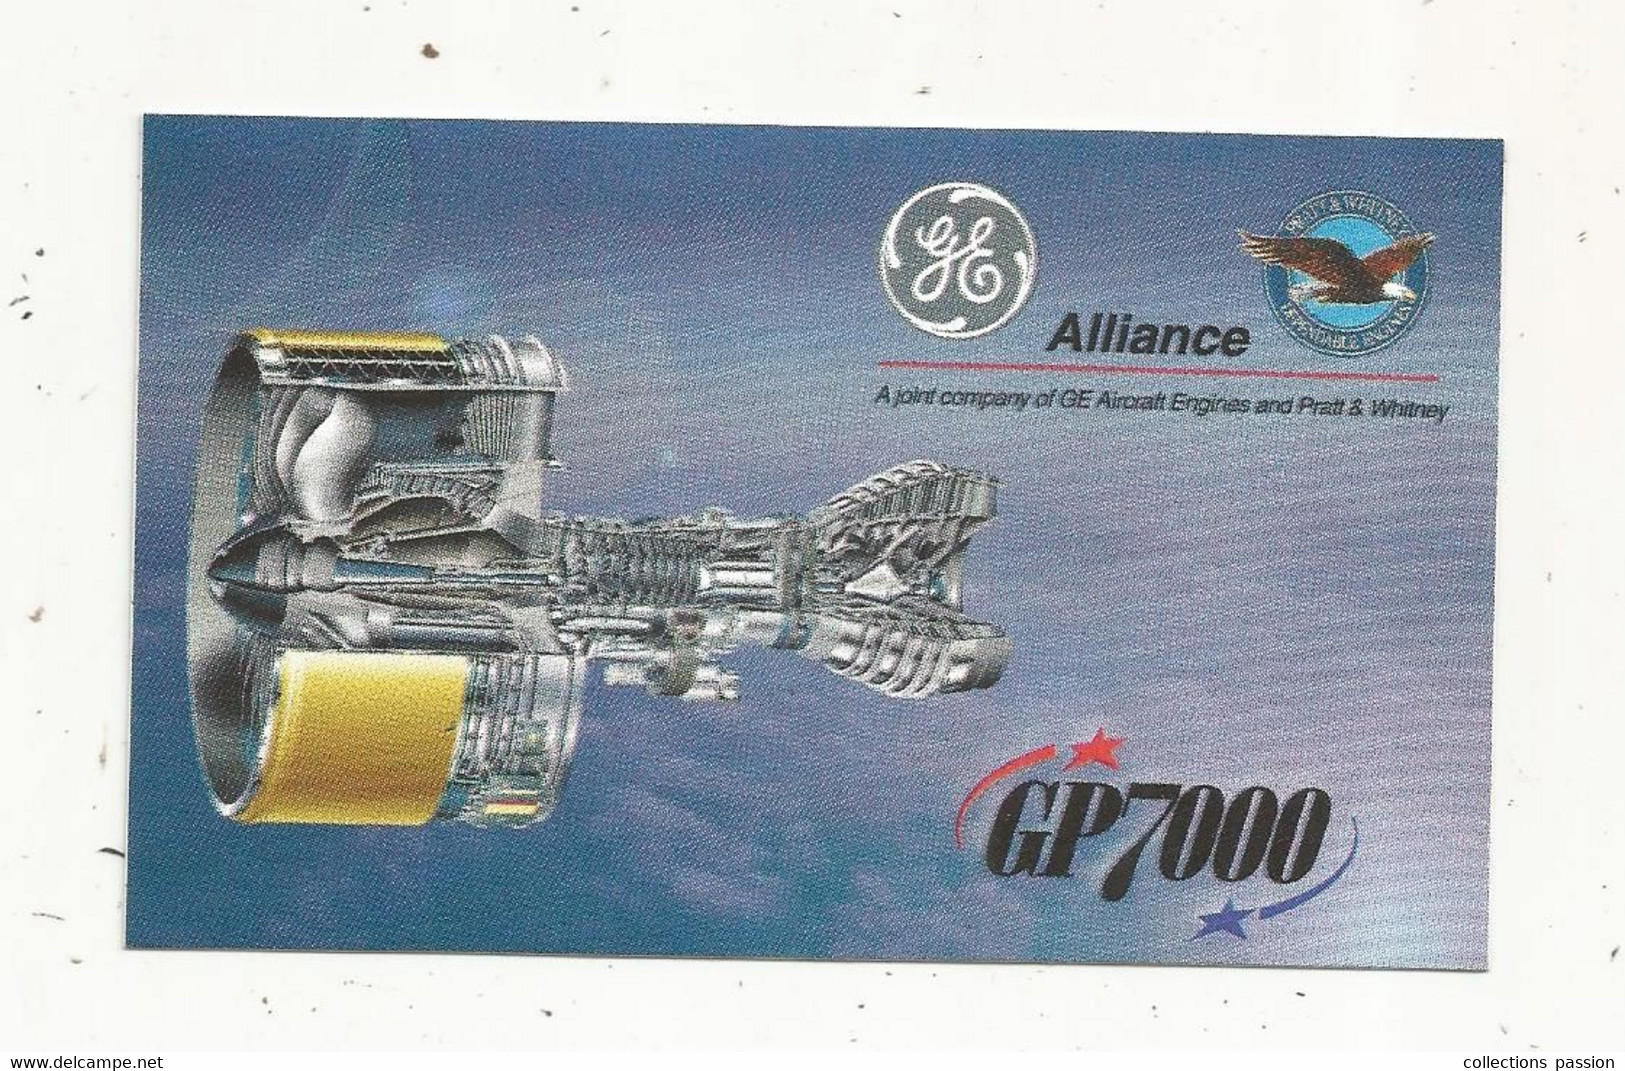 Autocollant, 120 X 75 Mm, AVIATION , Moteur GP7000 ,ALLIANCE : Joint Company Of GE Aircraft Engines And Pratt & Whitney - Autocollants